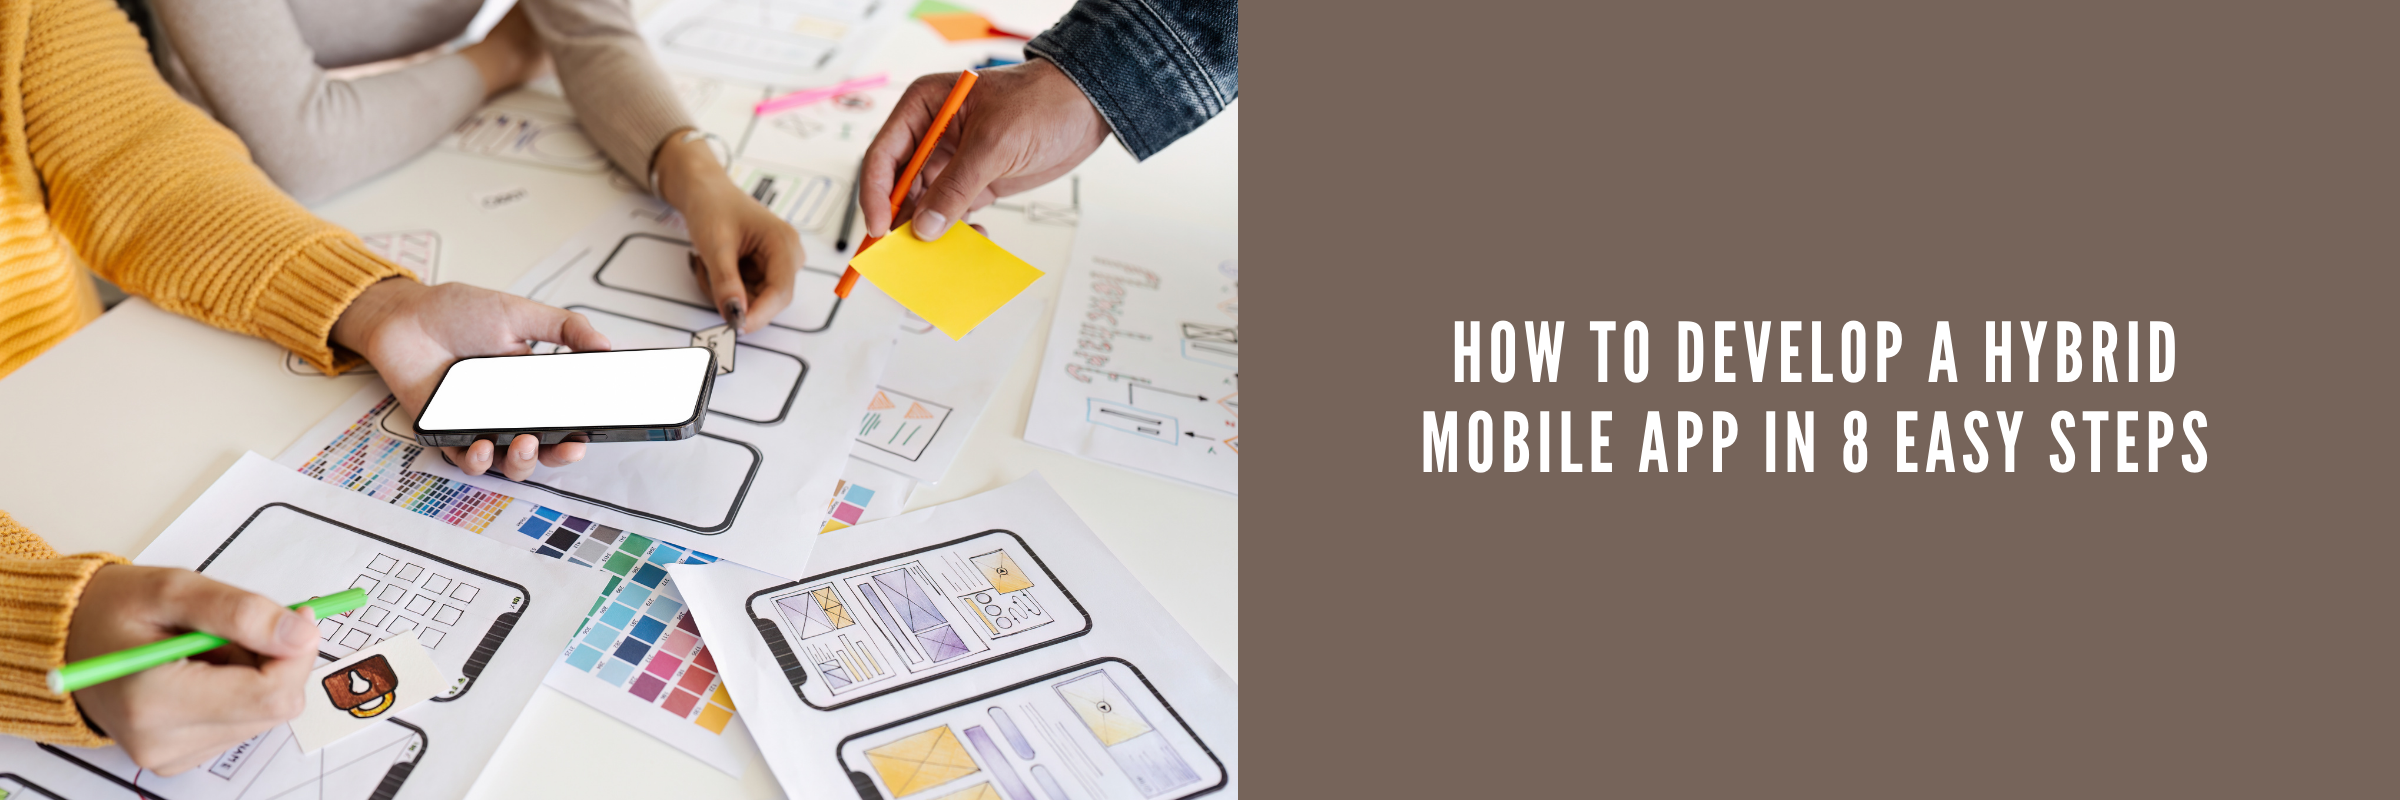 How to Develop a Hybrid Mobile App in 8 Easy Steps